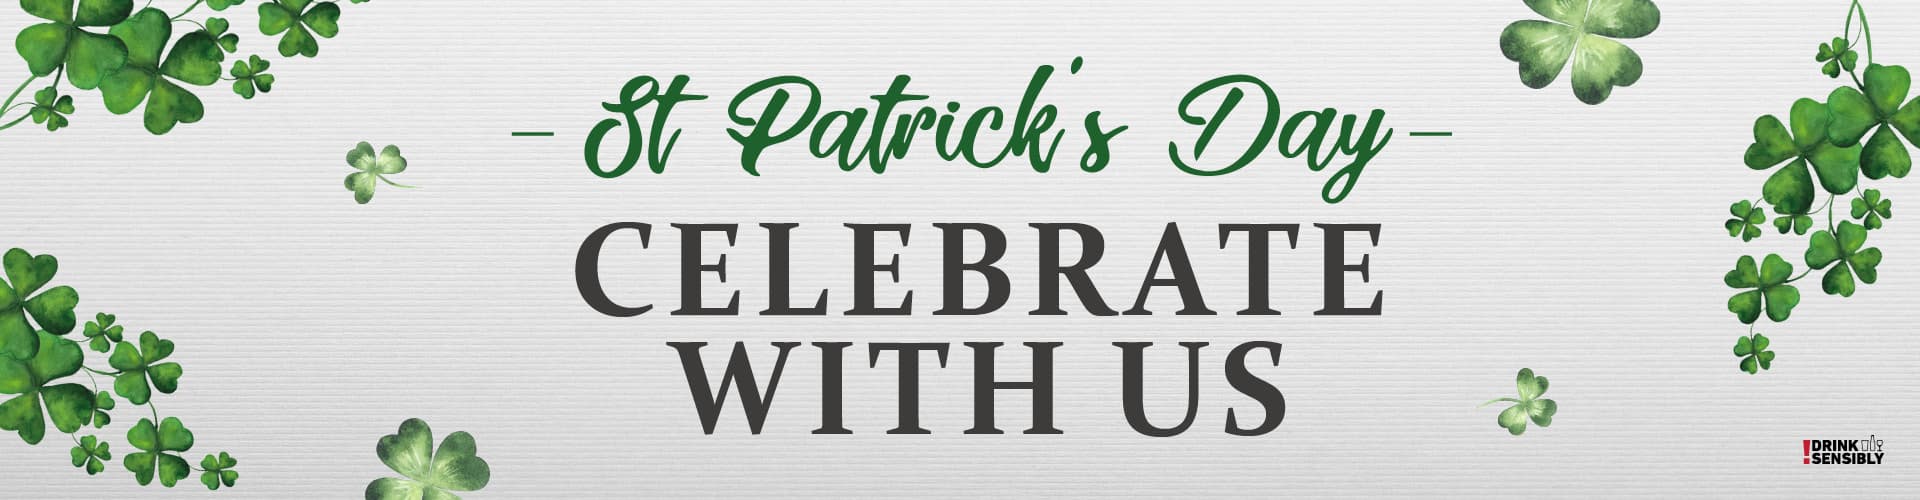 Celebrate St Patrick's Day in Exmouth